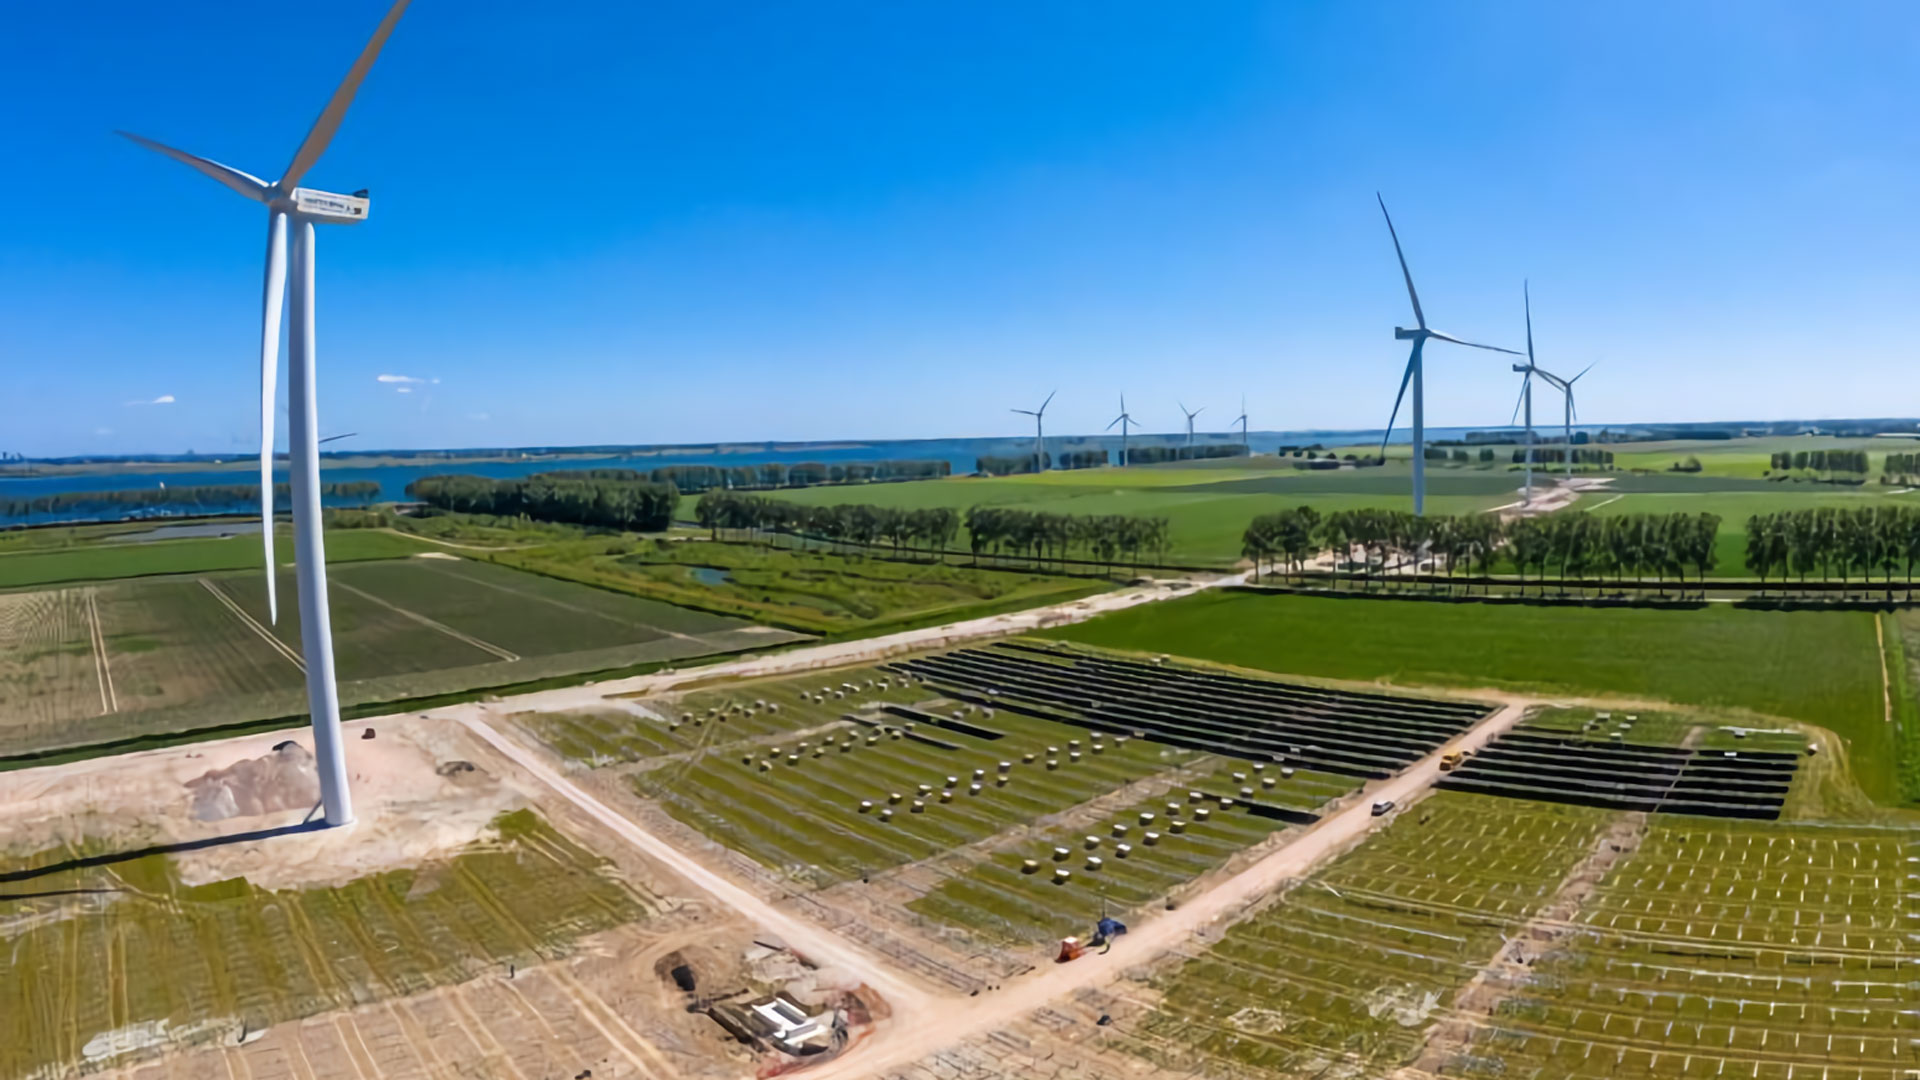 Energy Park Haringvliet is Vattenfall’s first park where wind, solar and batteries are all installed before inauguration.